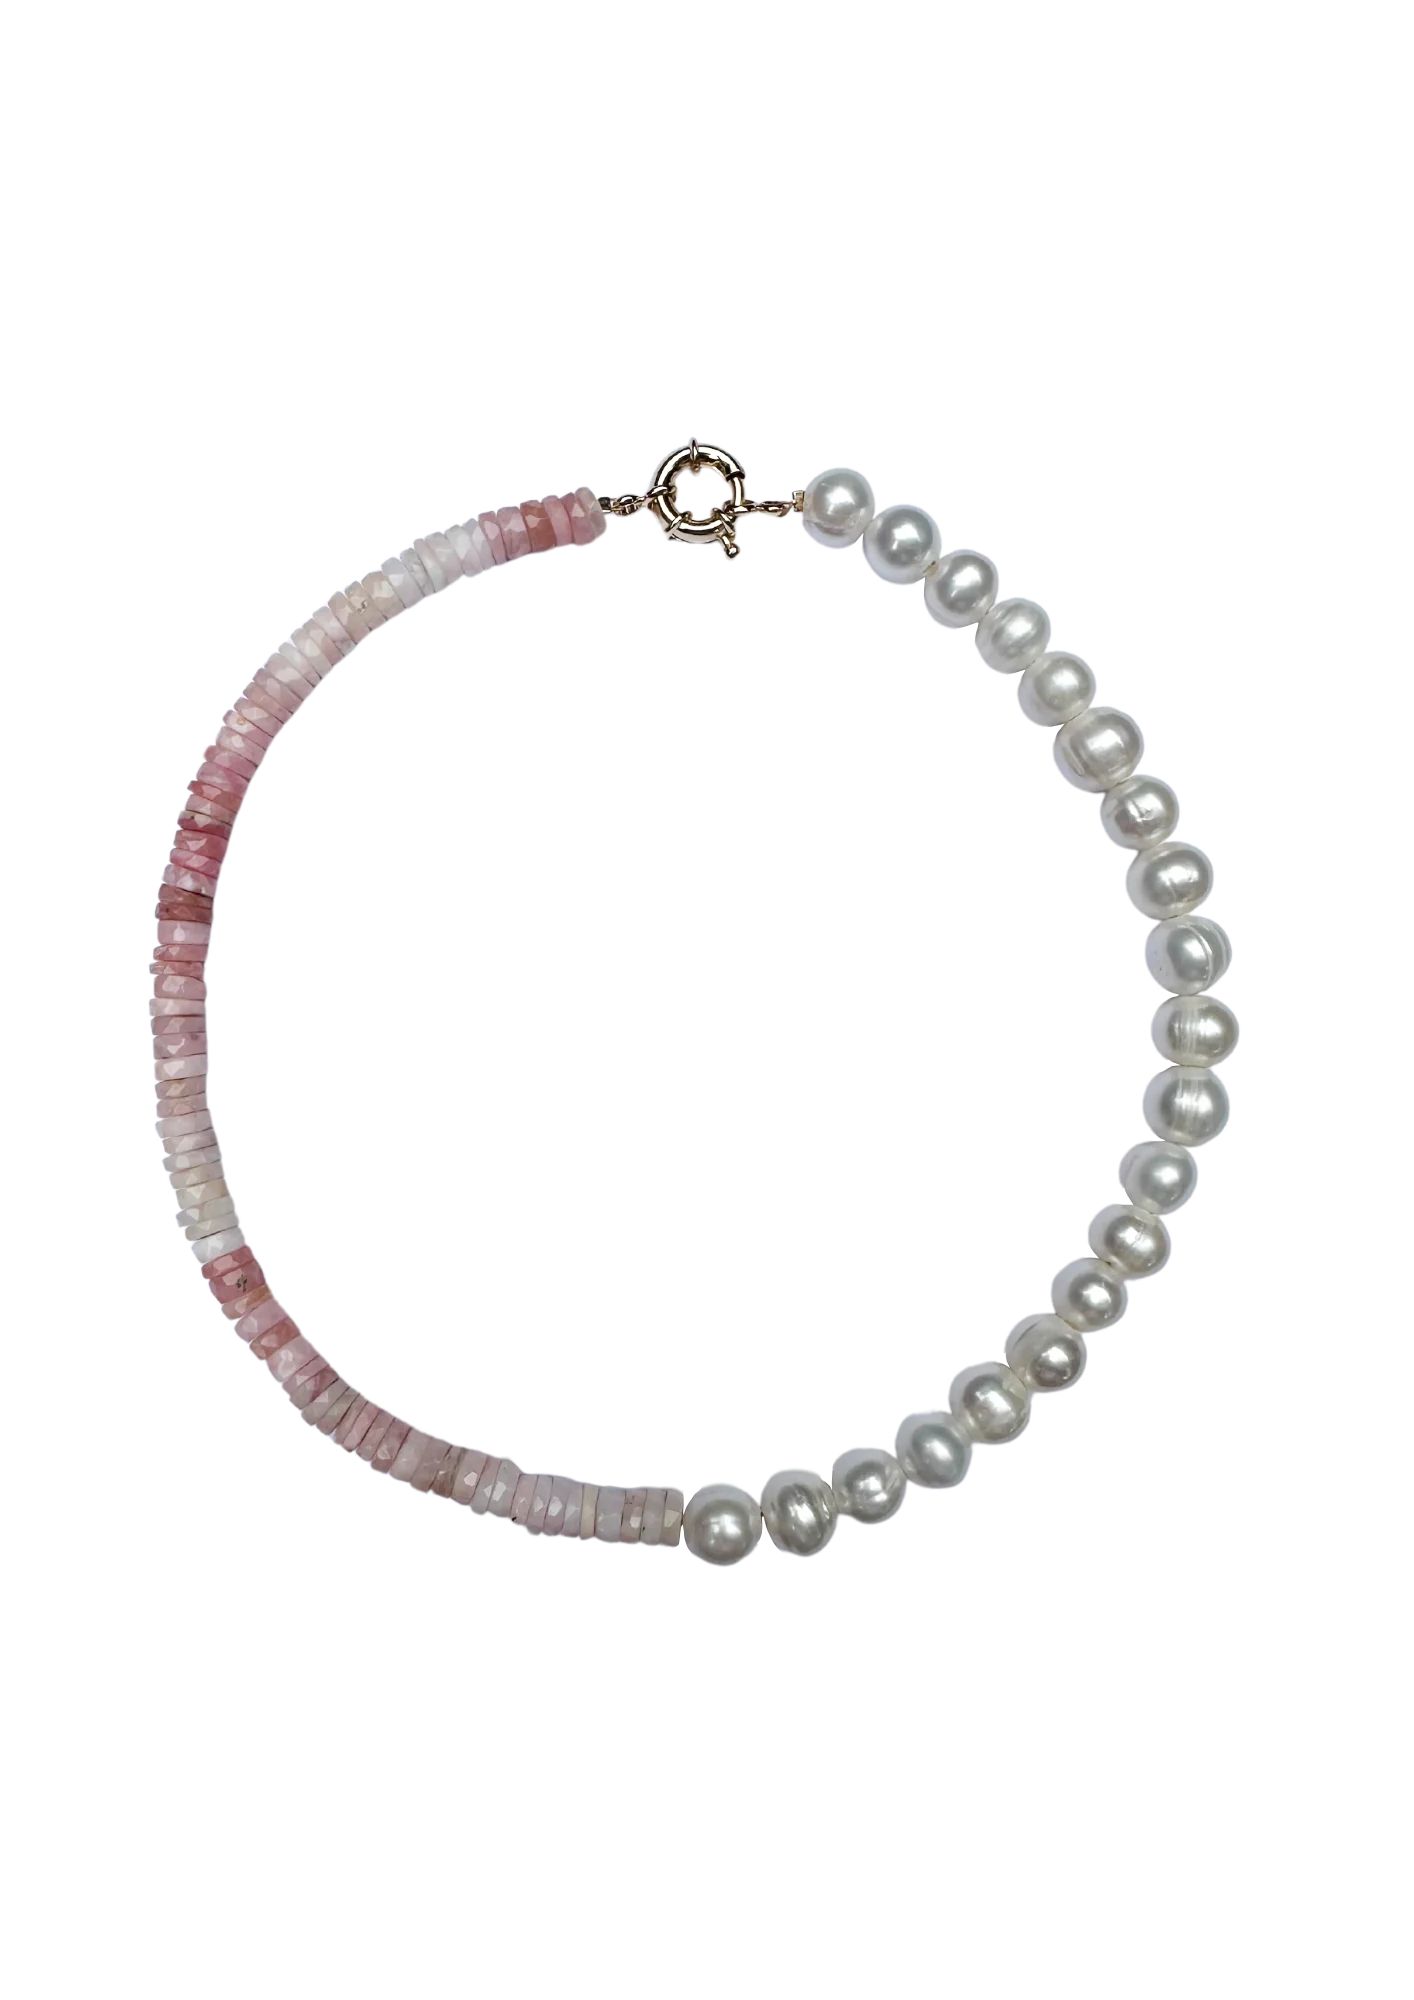 Limited Edition: Pink OPAL & Freshwater Pearl Necklace | Nicola Bathie Jewelry